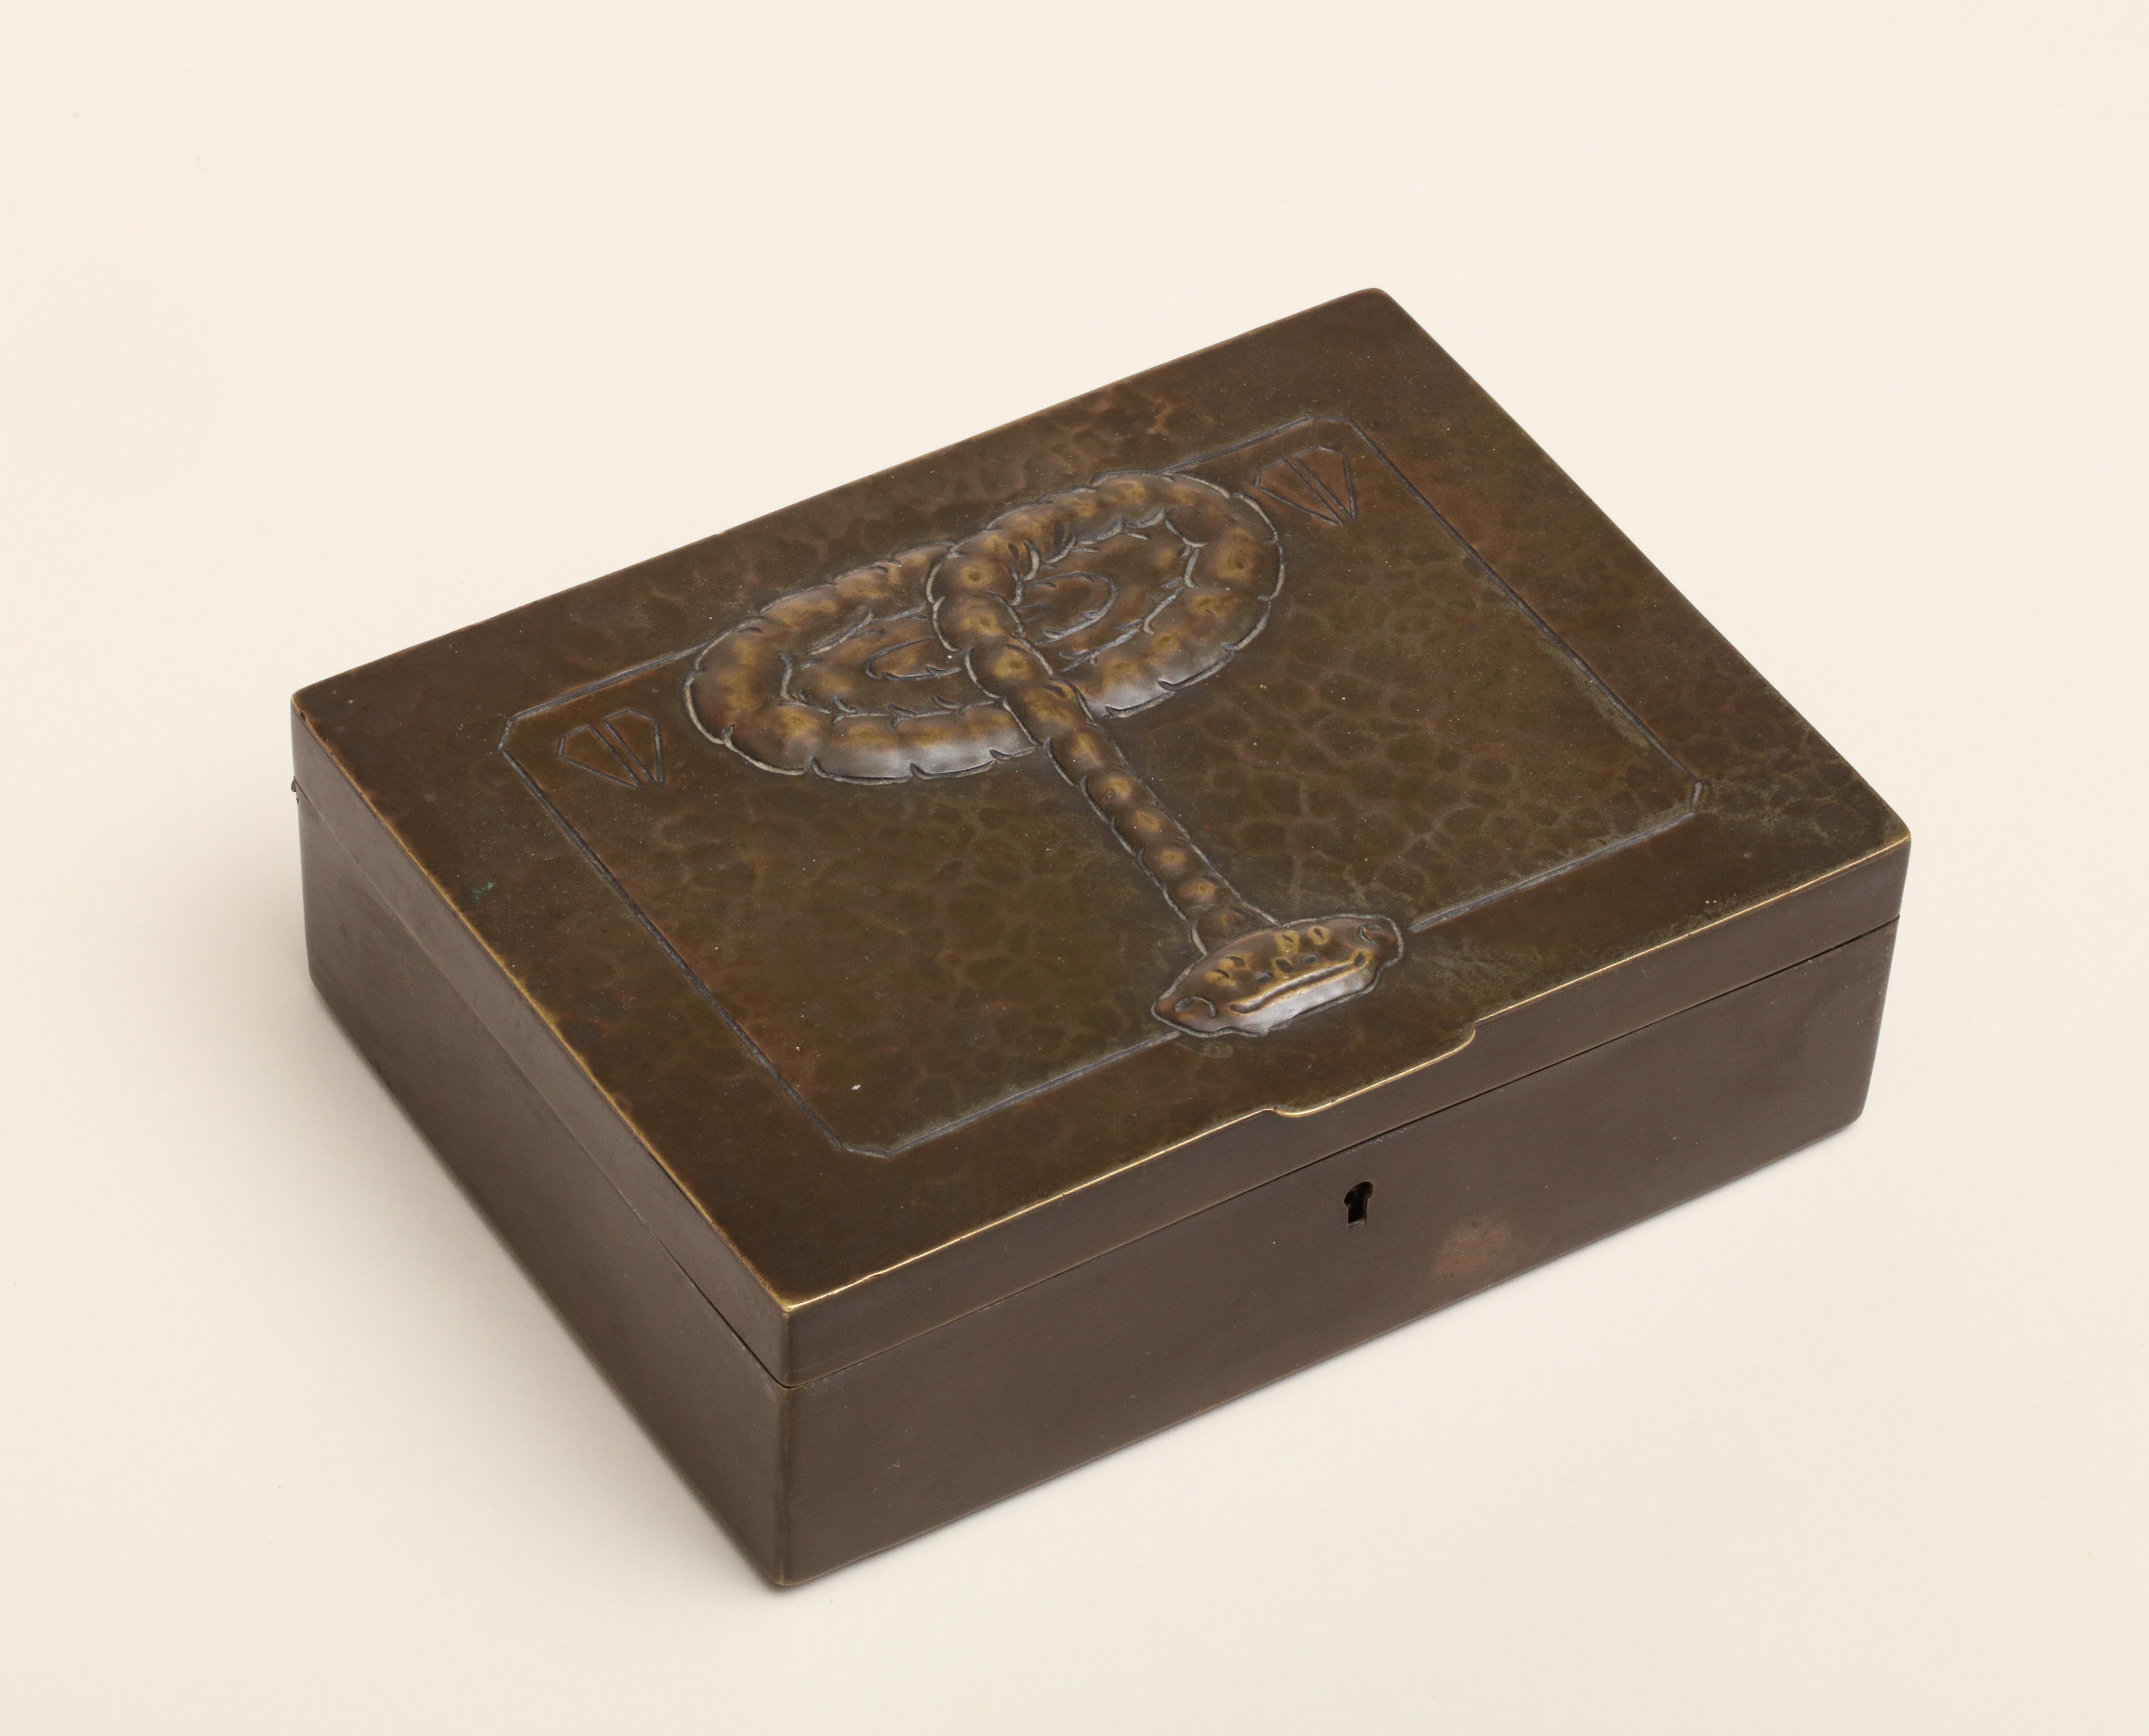 This is a Continental Art Deco hinged bronze box with elevated snake design on a martele ground top. Has working lock and key. It is lined in red silk.